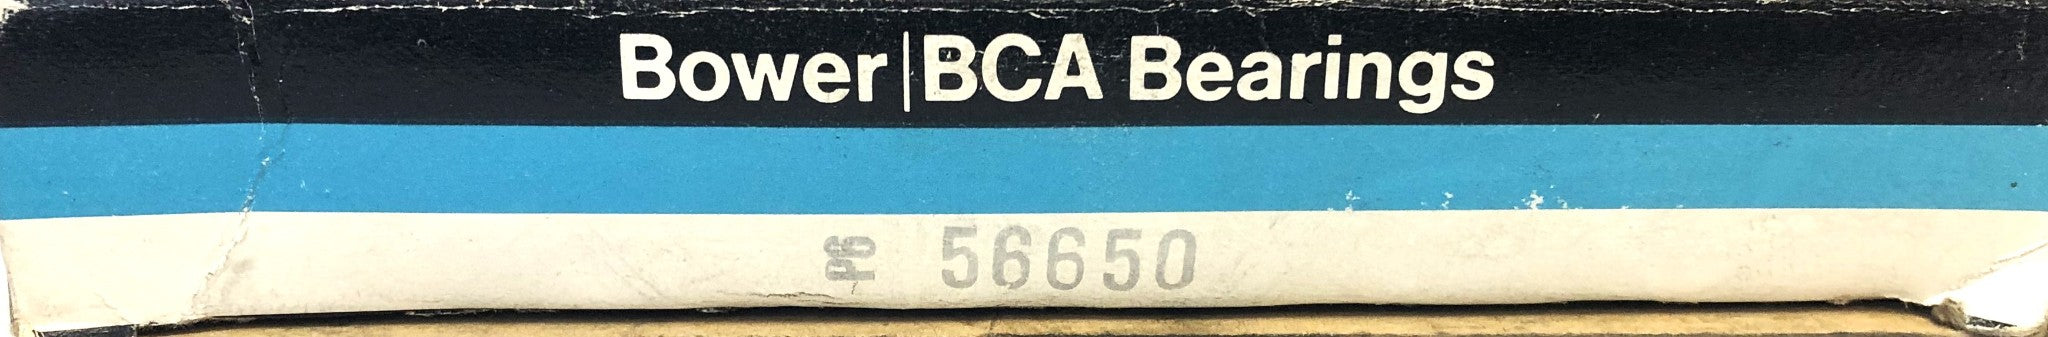 Bower/BCA Federal Mogul Tapered Roller Bearing Cup 56650 NOS